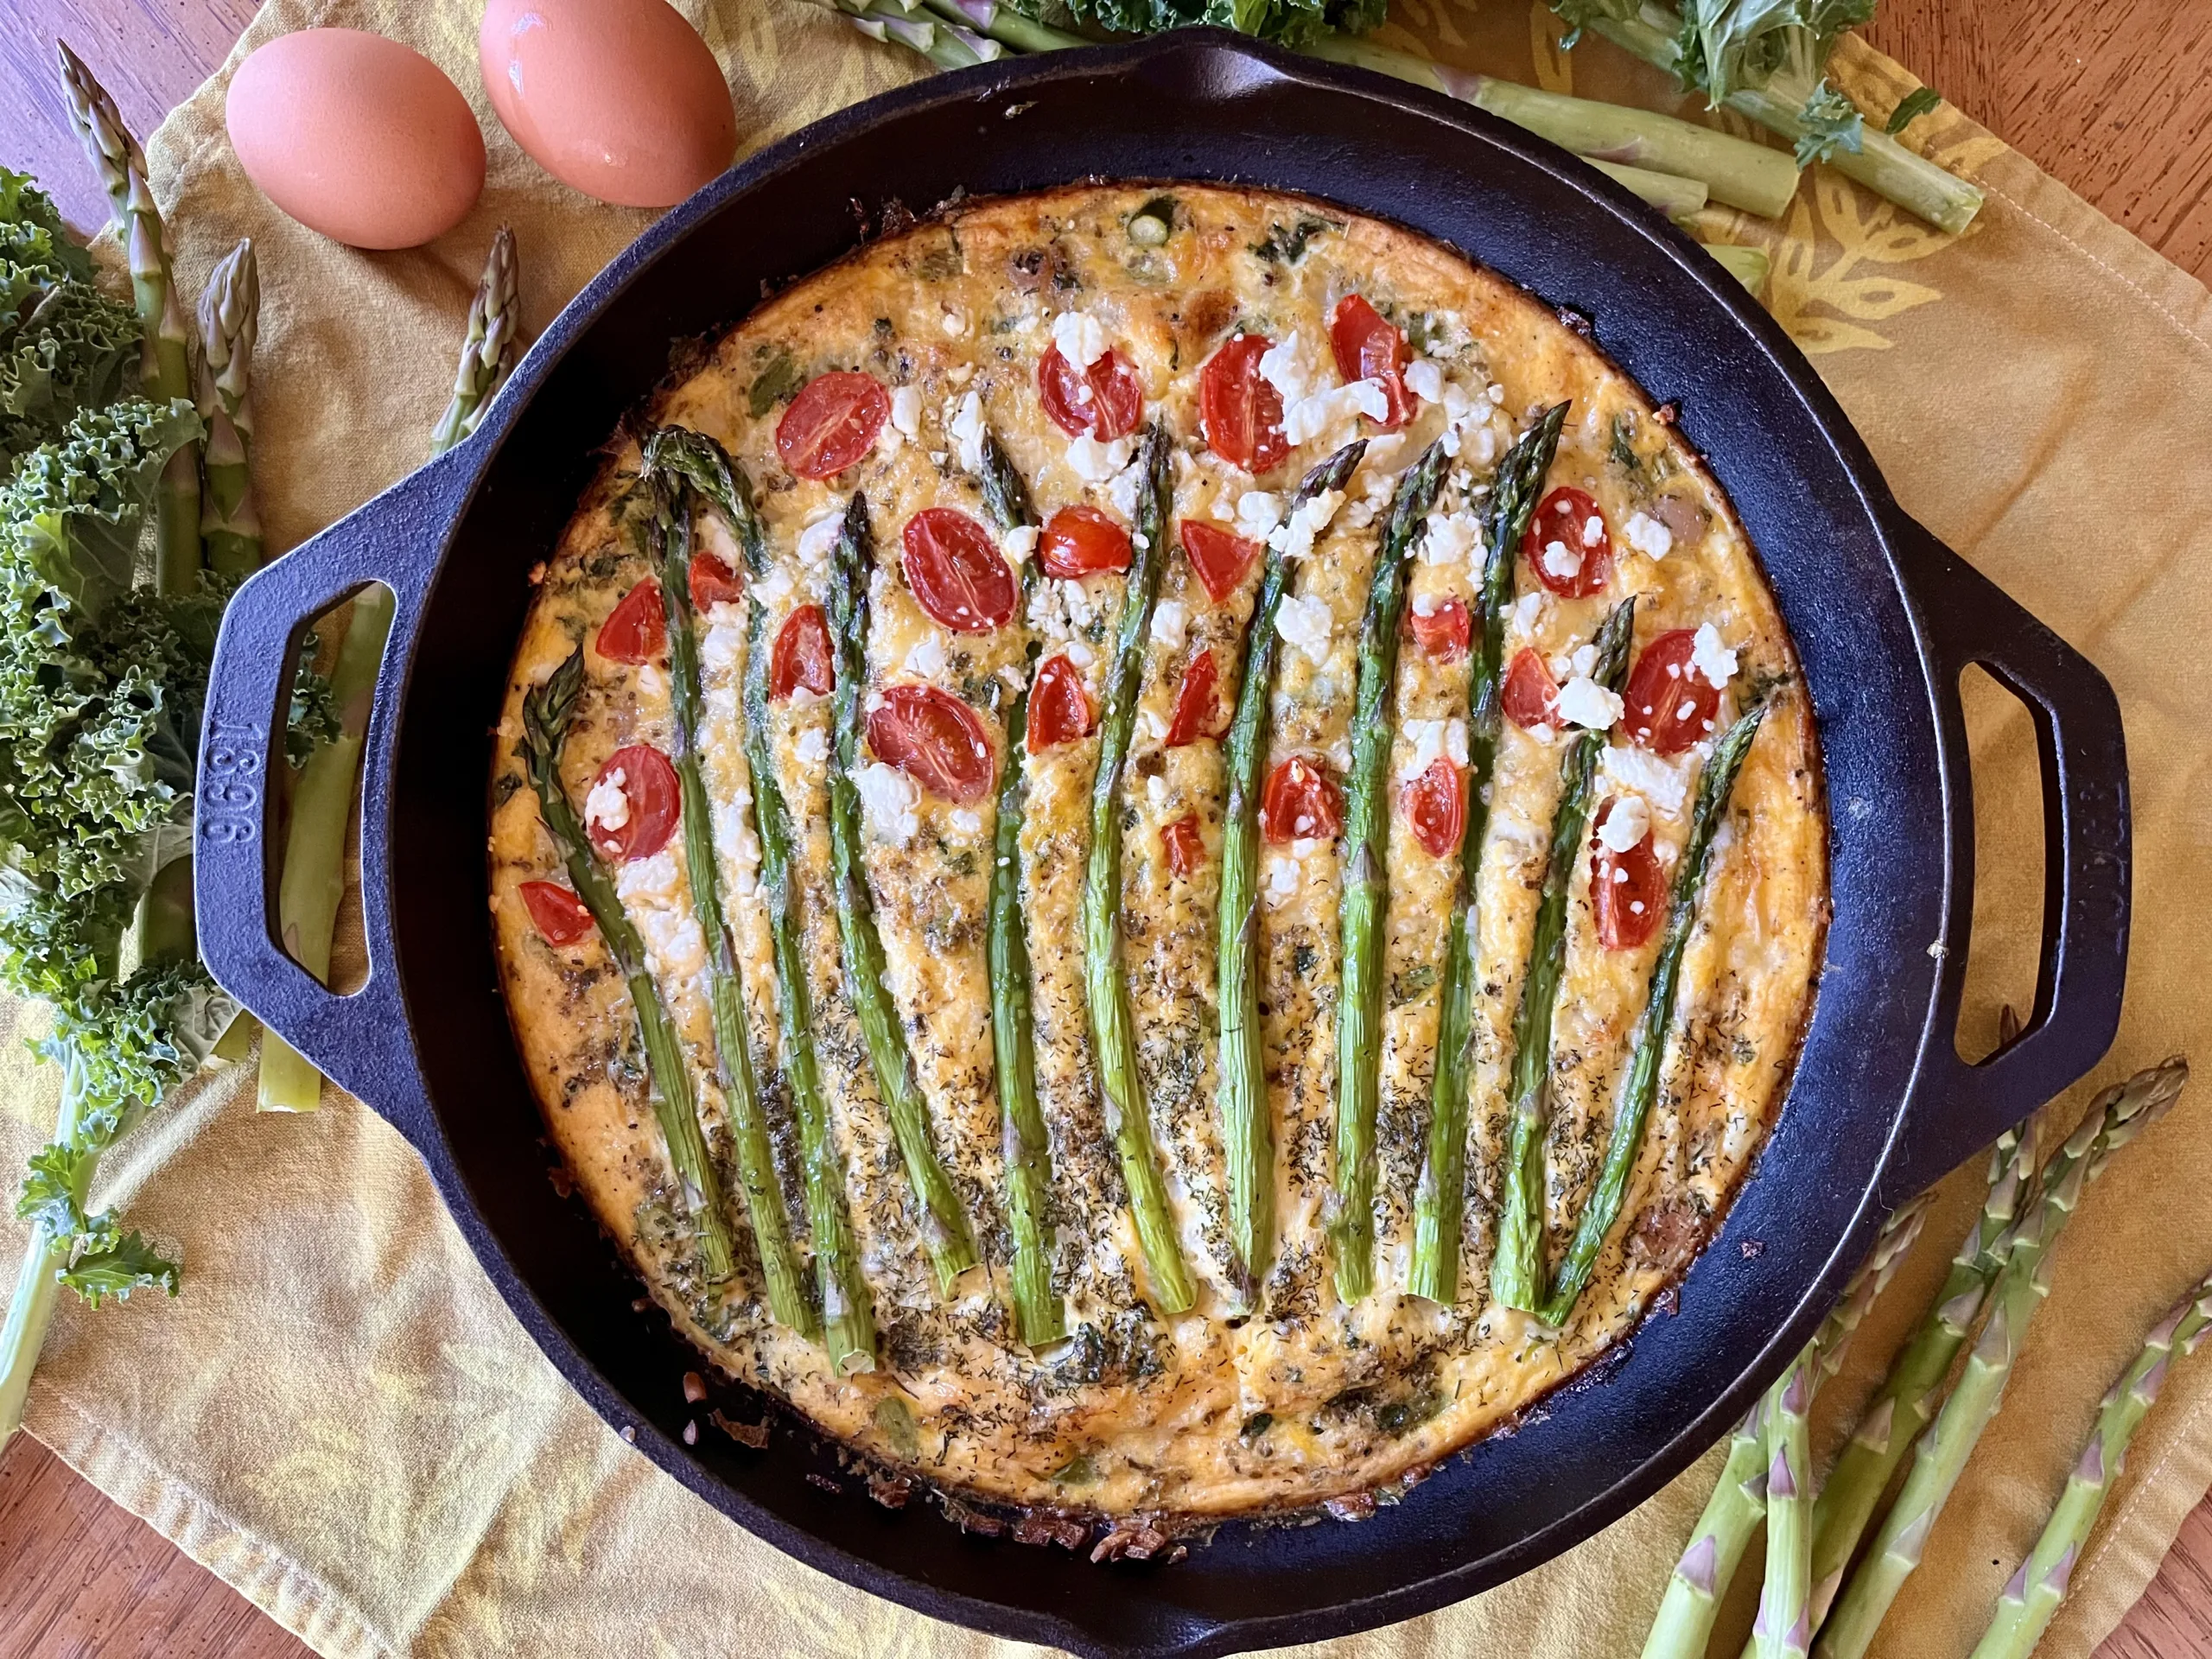 A finished frittata sits on a counter, ready to be enjoyed. It is topped with asparagus and tomatoes.